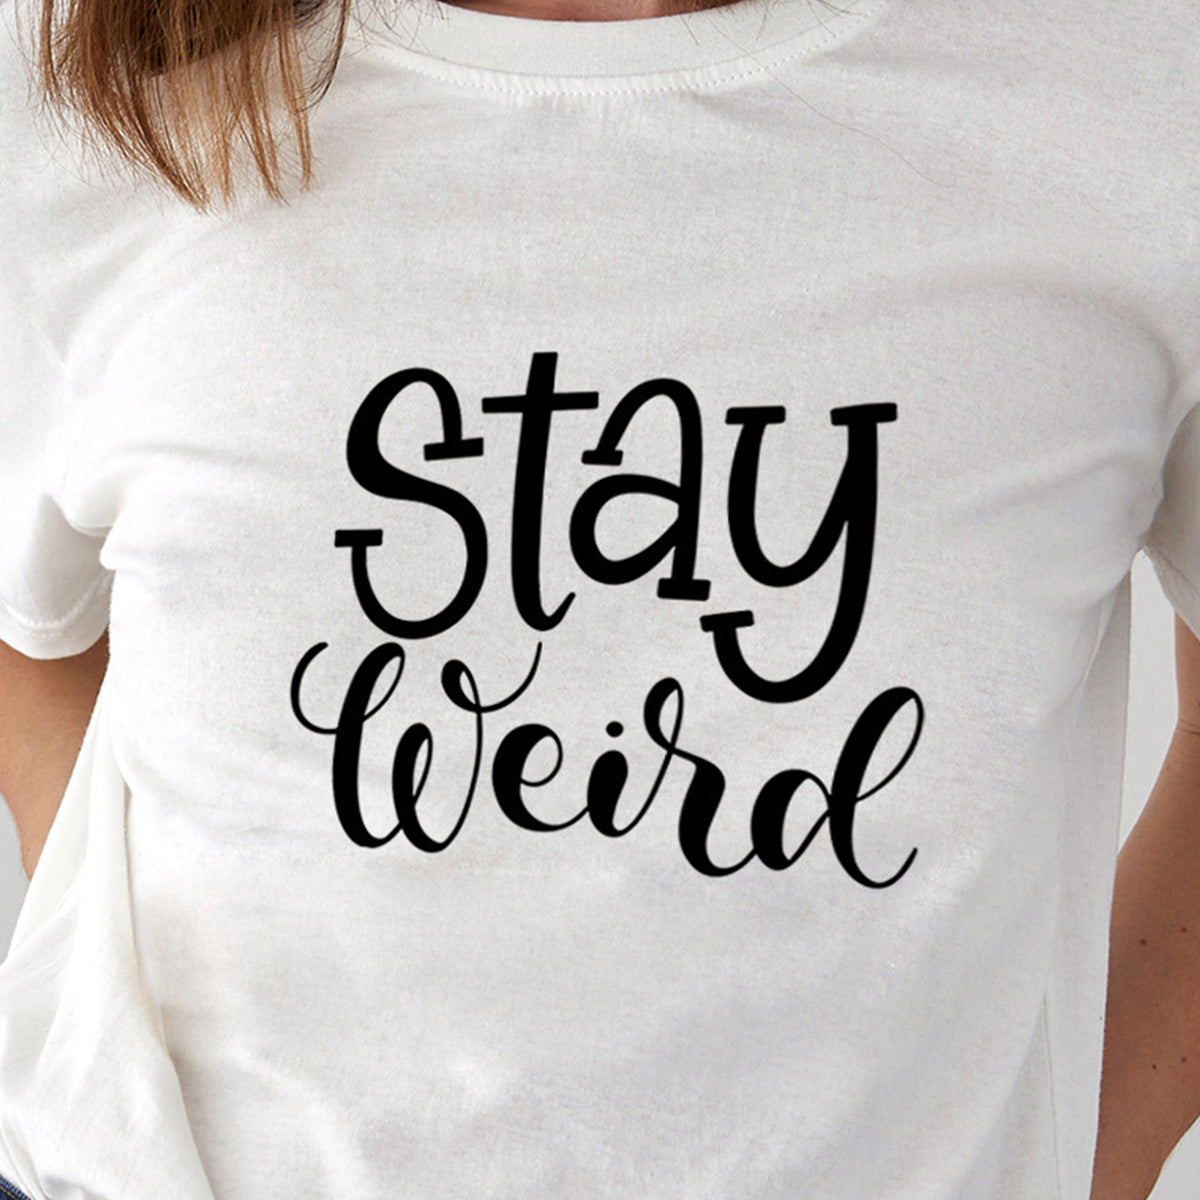 Stay Weird - Printed Cotton T- Shirt - White